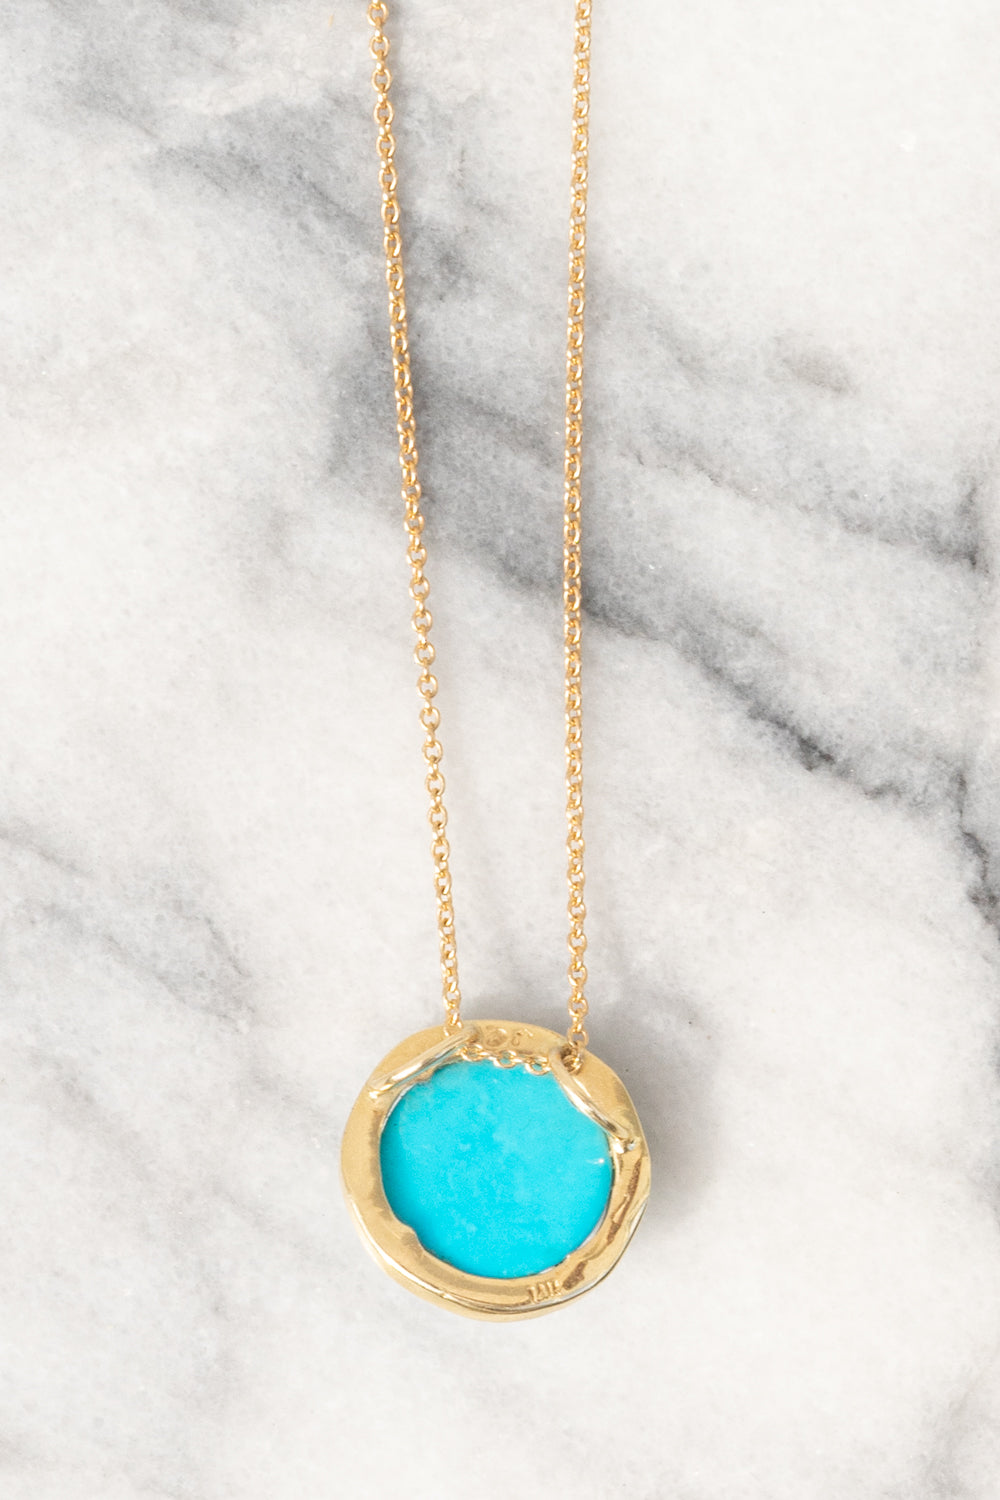 Janna Conner Sleeping Beauty Turquoise Necklace with Diamond Pavé 14K Yellow Gold view from backside